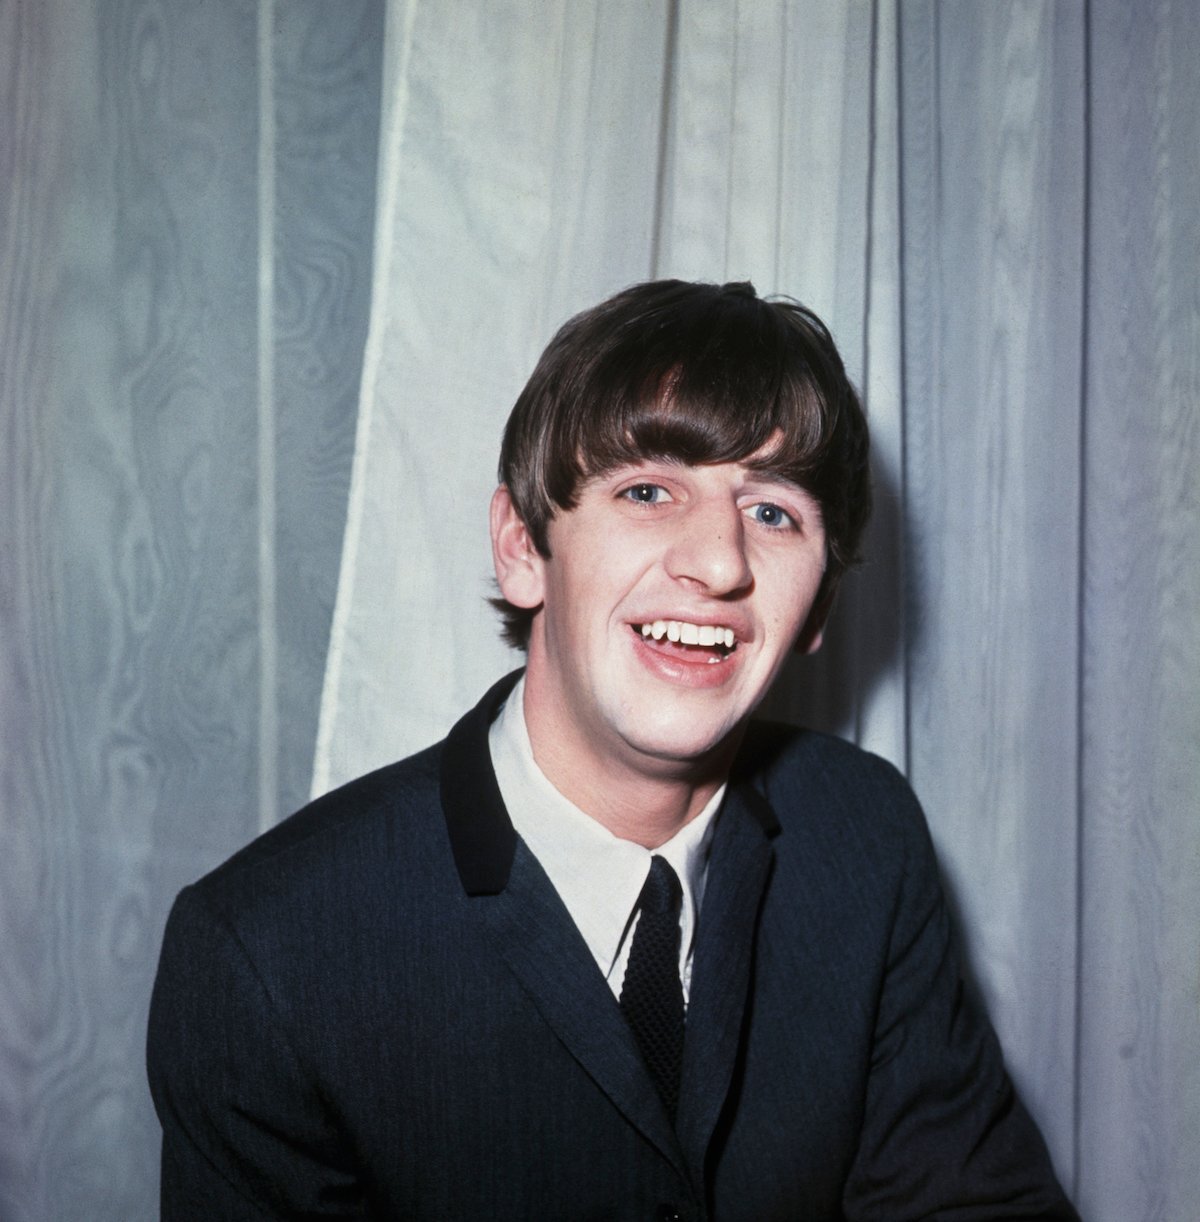 ‘The Beatles’: Ringo Starr Would Only Room With 1 Bandmate on Tour